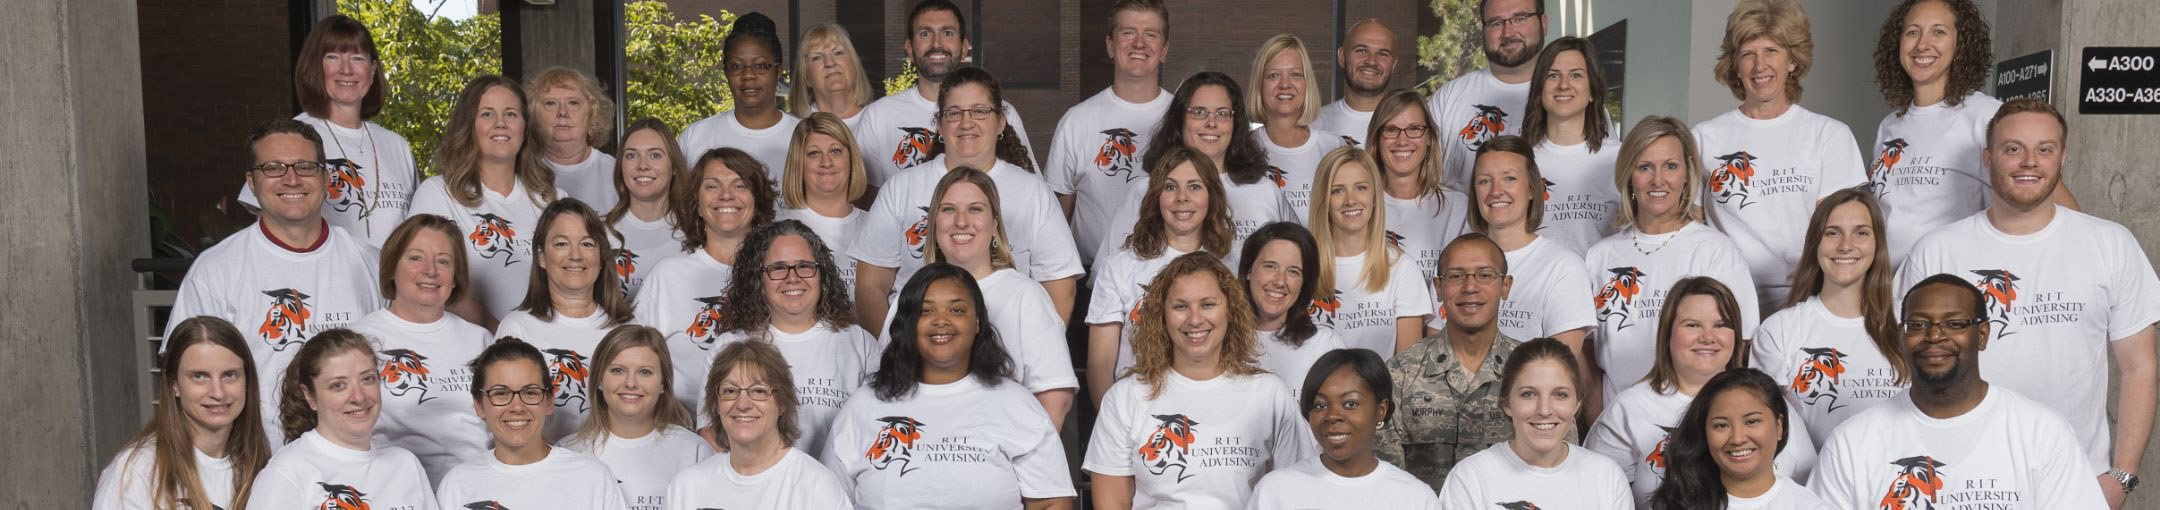 A group of people standing for a photo wearing shirts that say RIT University Advising